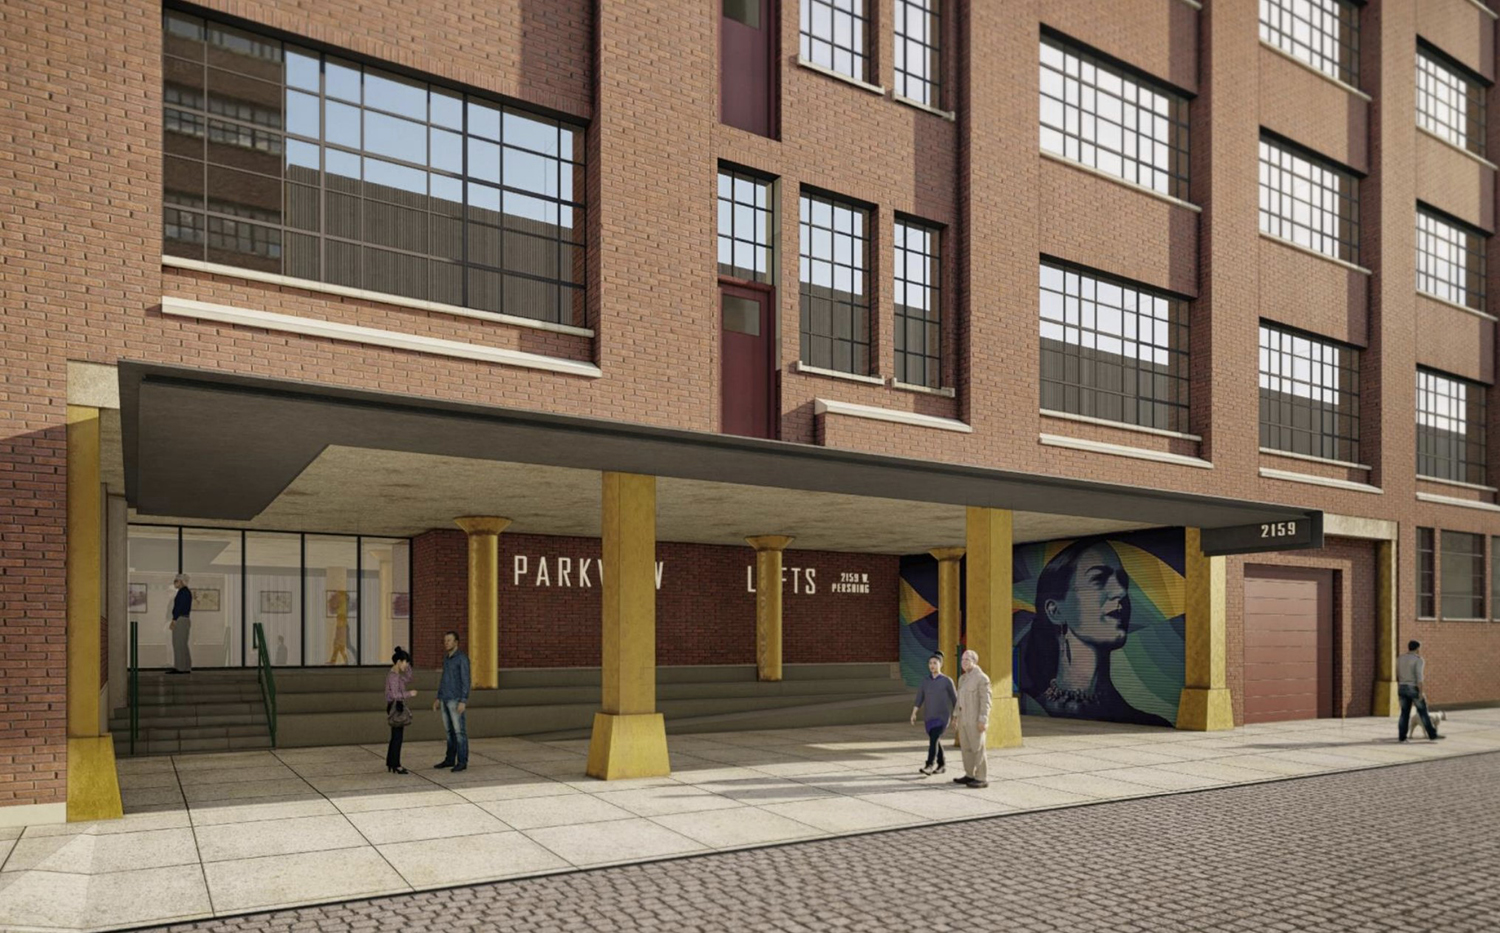 Entry at Parkview Lofts at 2159 W Pershing Road. Rendering by FitzGerald Associates